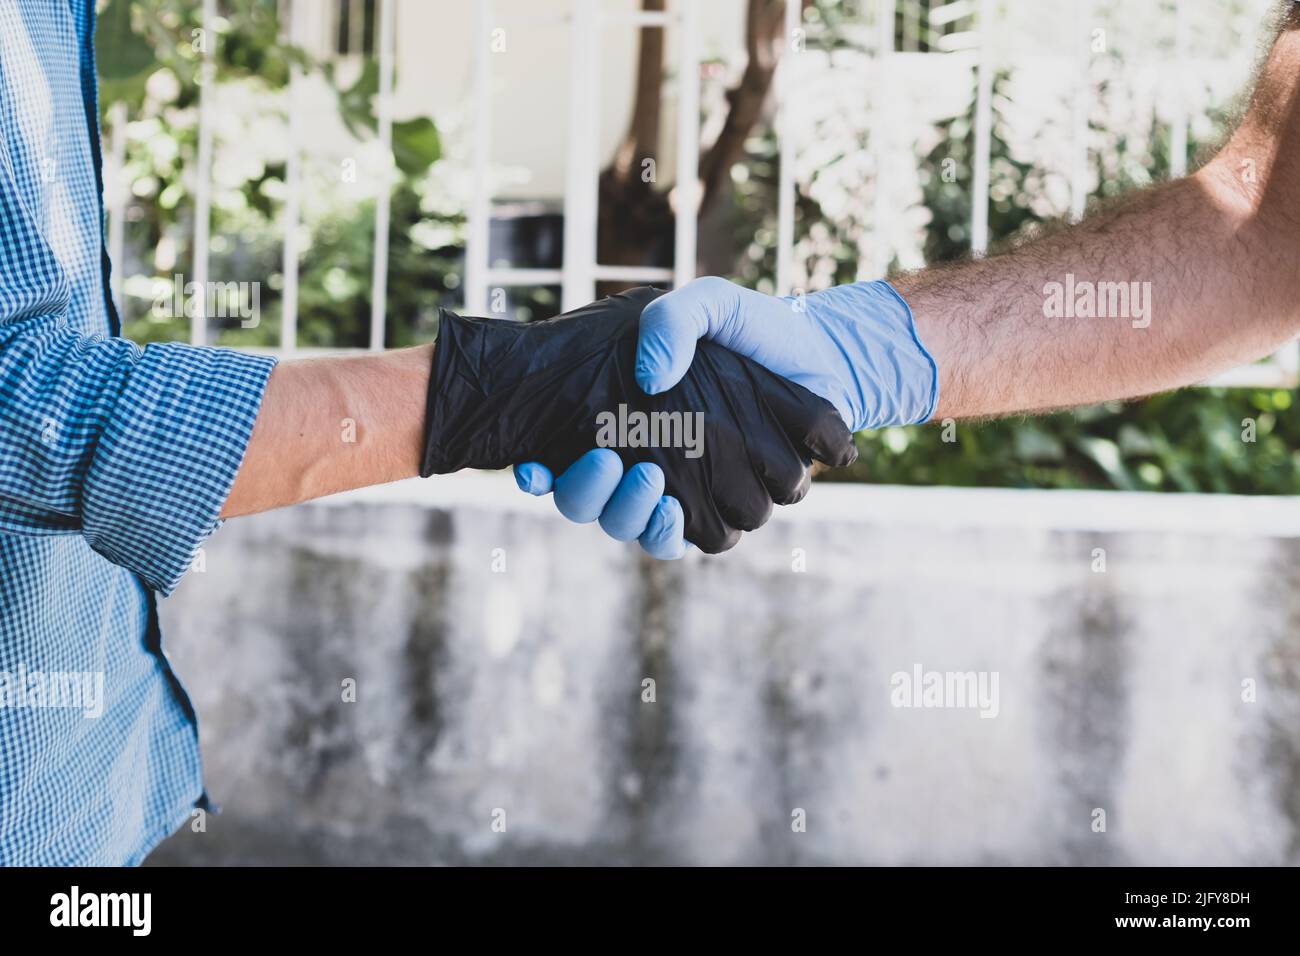 wearing gloves to stay away from smallpox. no contact. Stock Photo